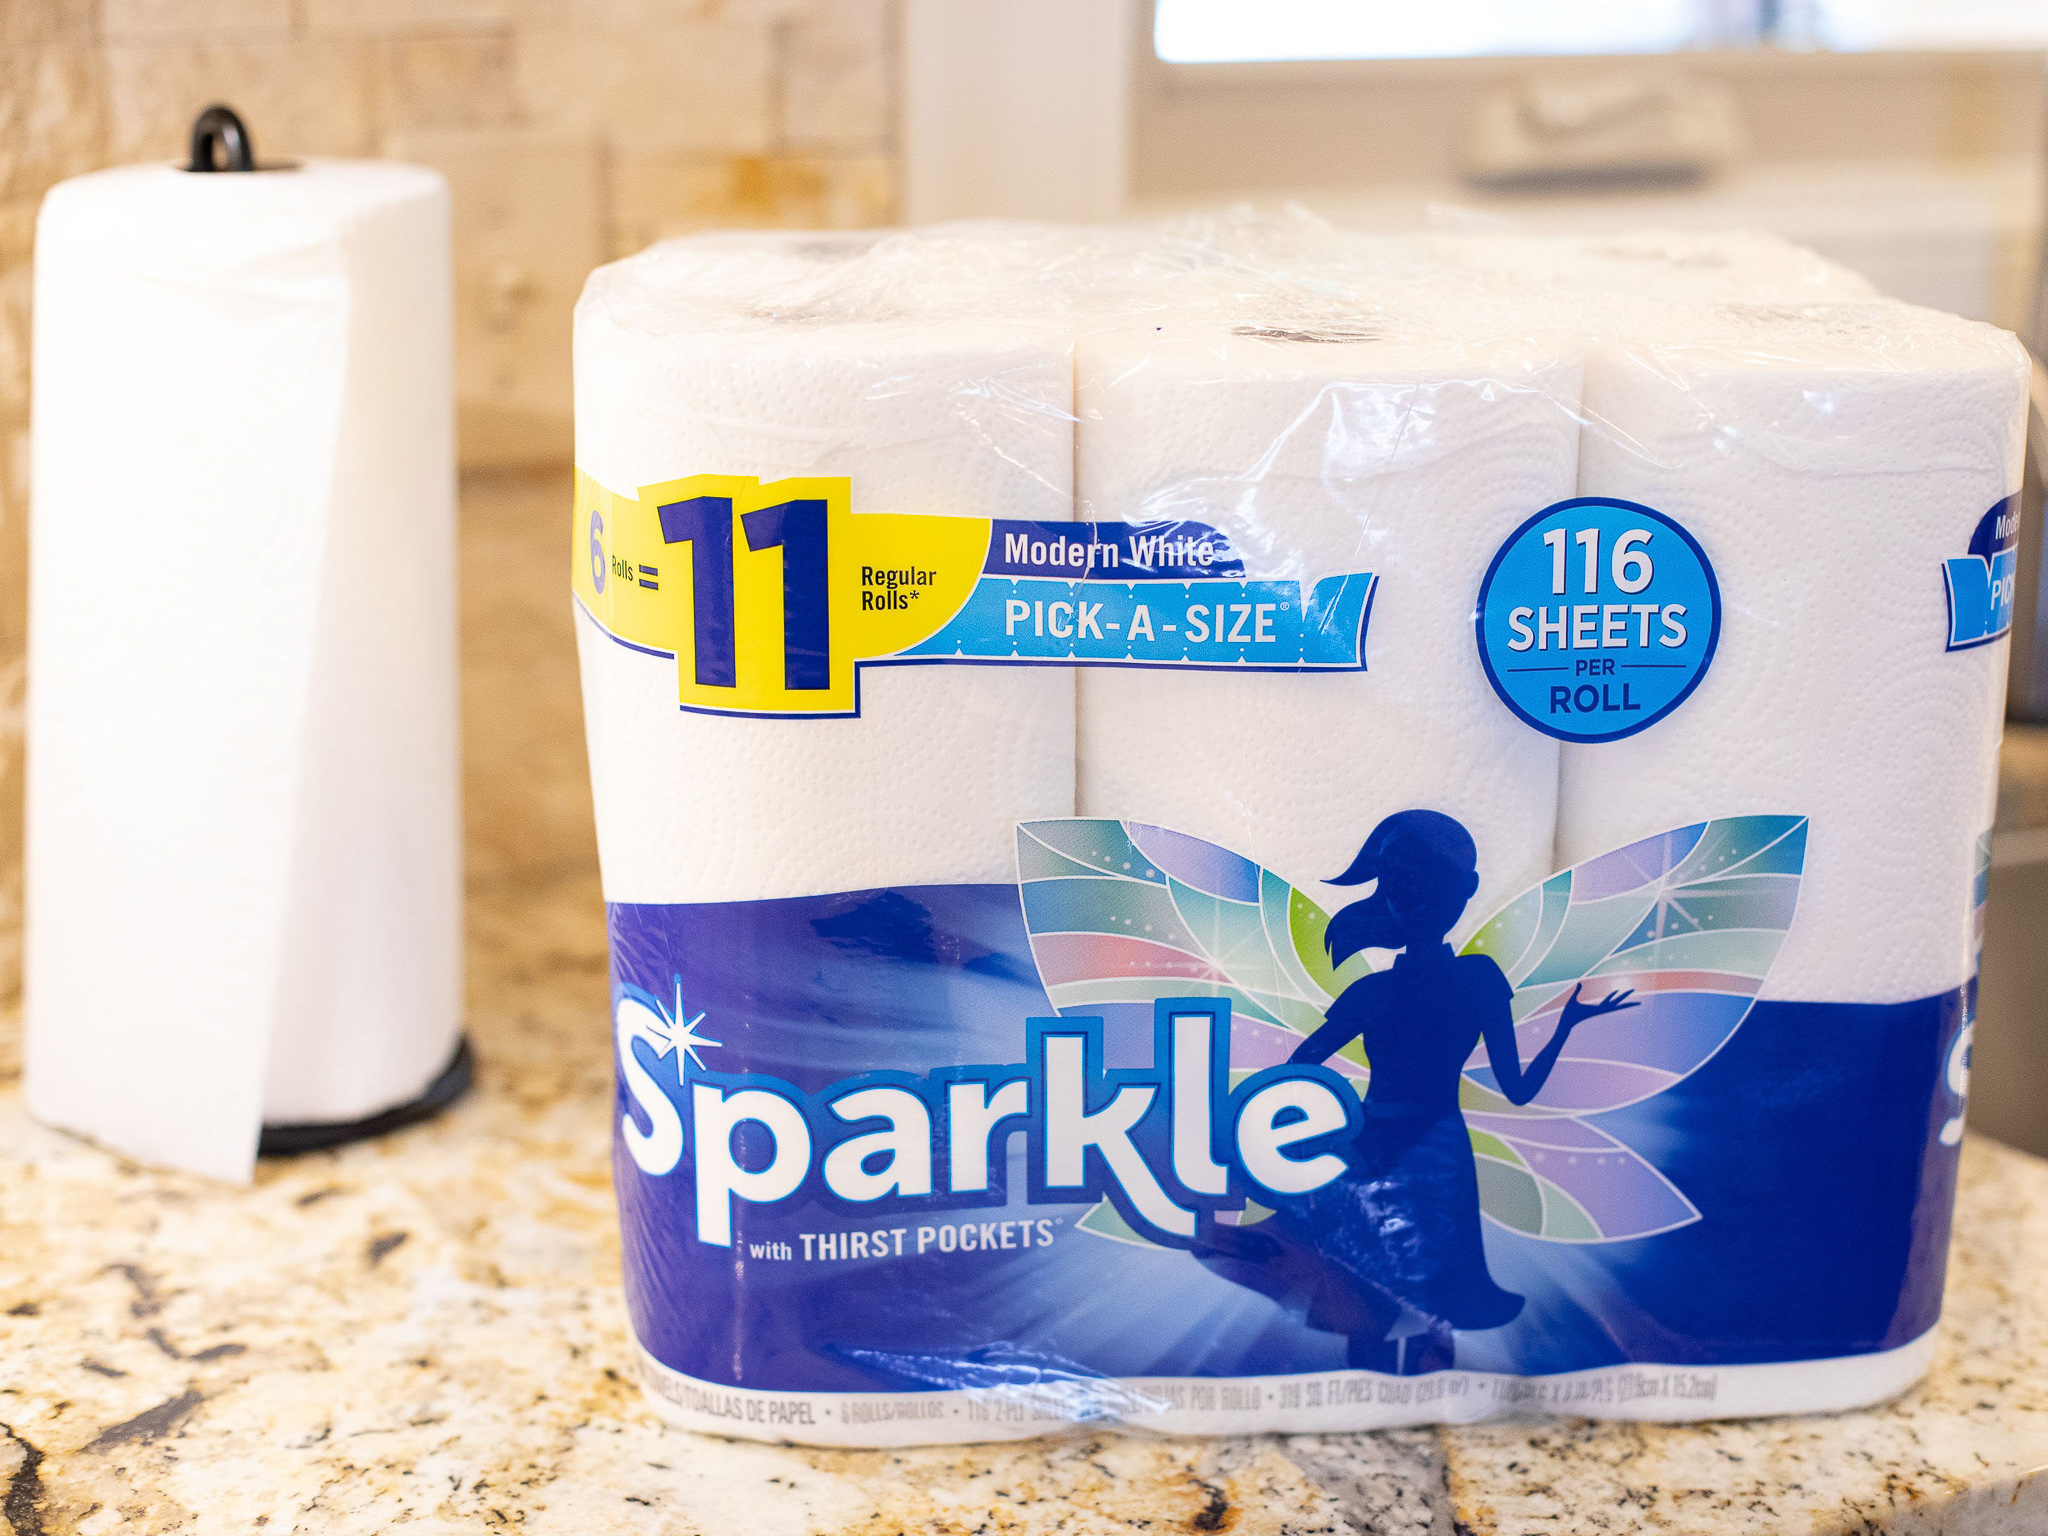 Sparkle Paper Towels Just $4.49 At Publix – Almost Half Price!